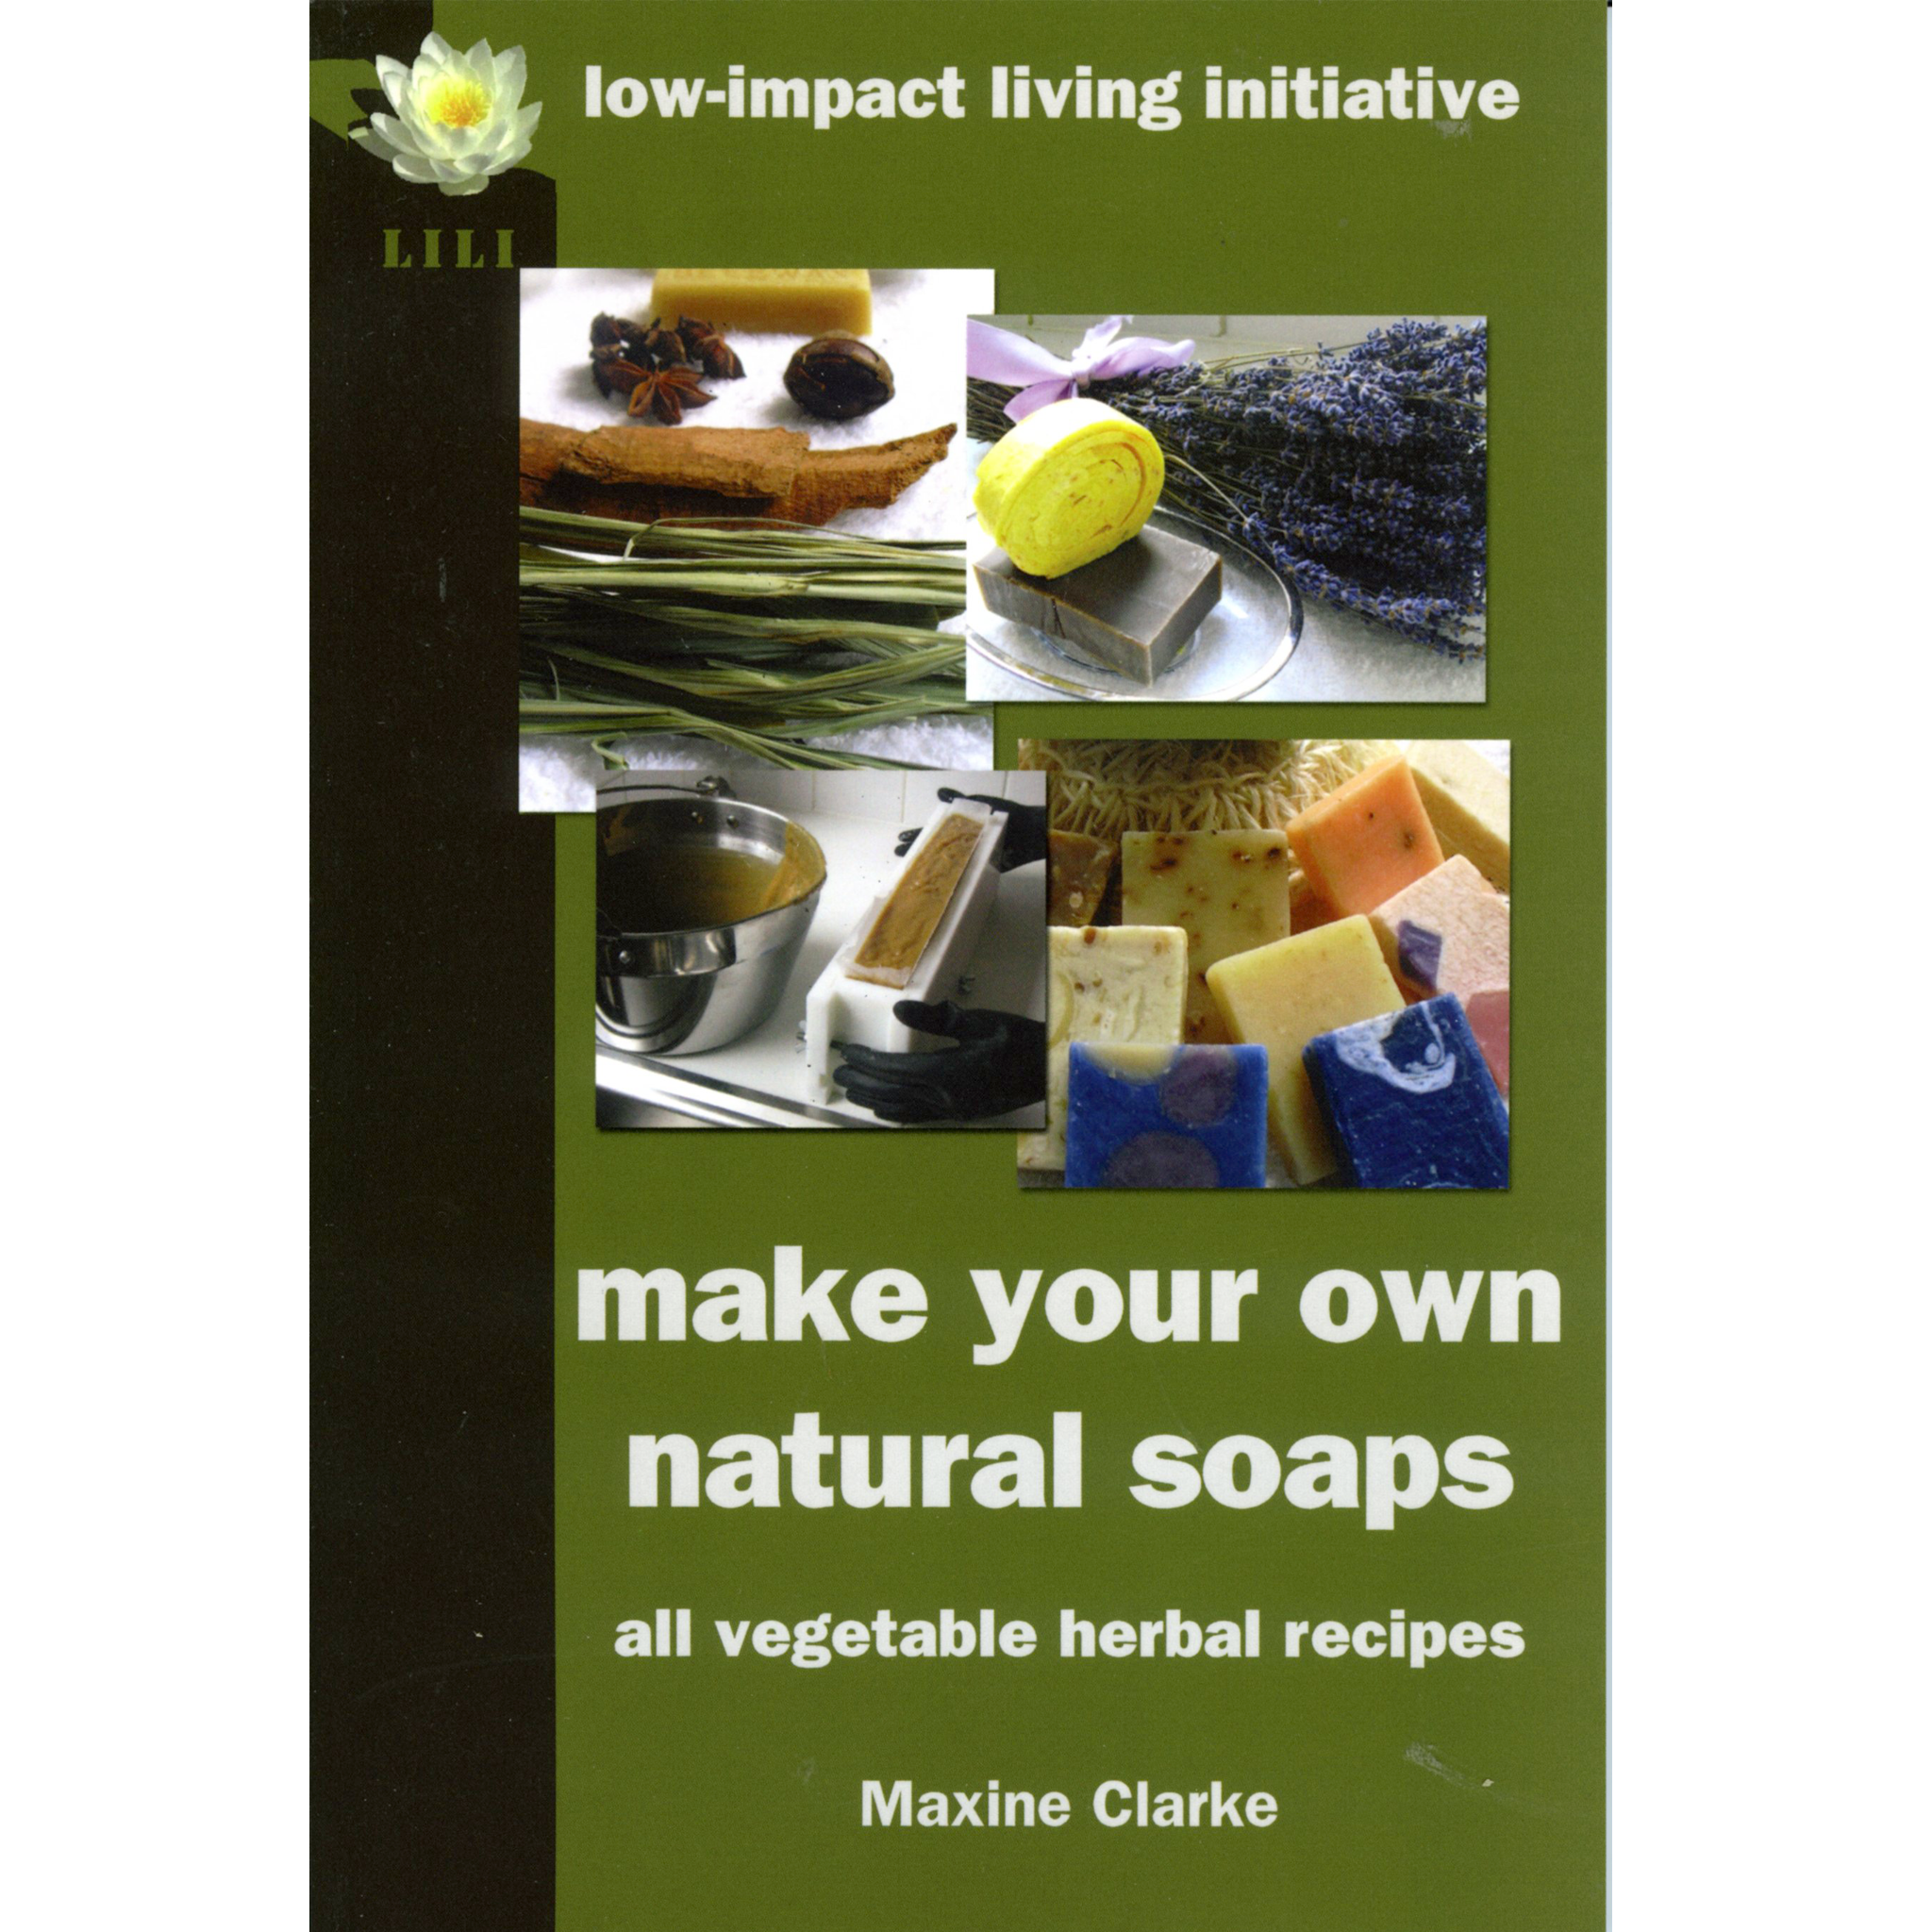 Make your own natural soaps